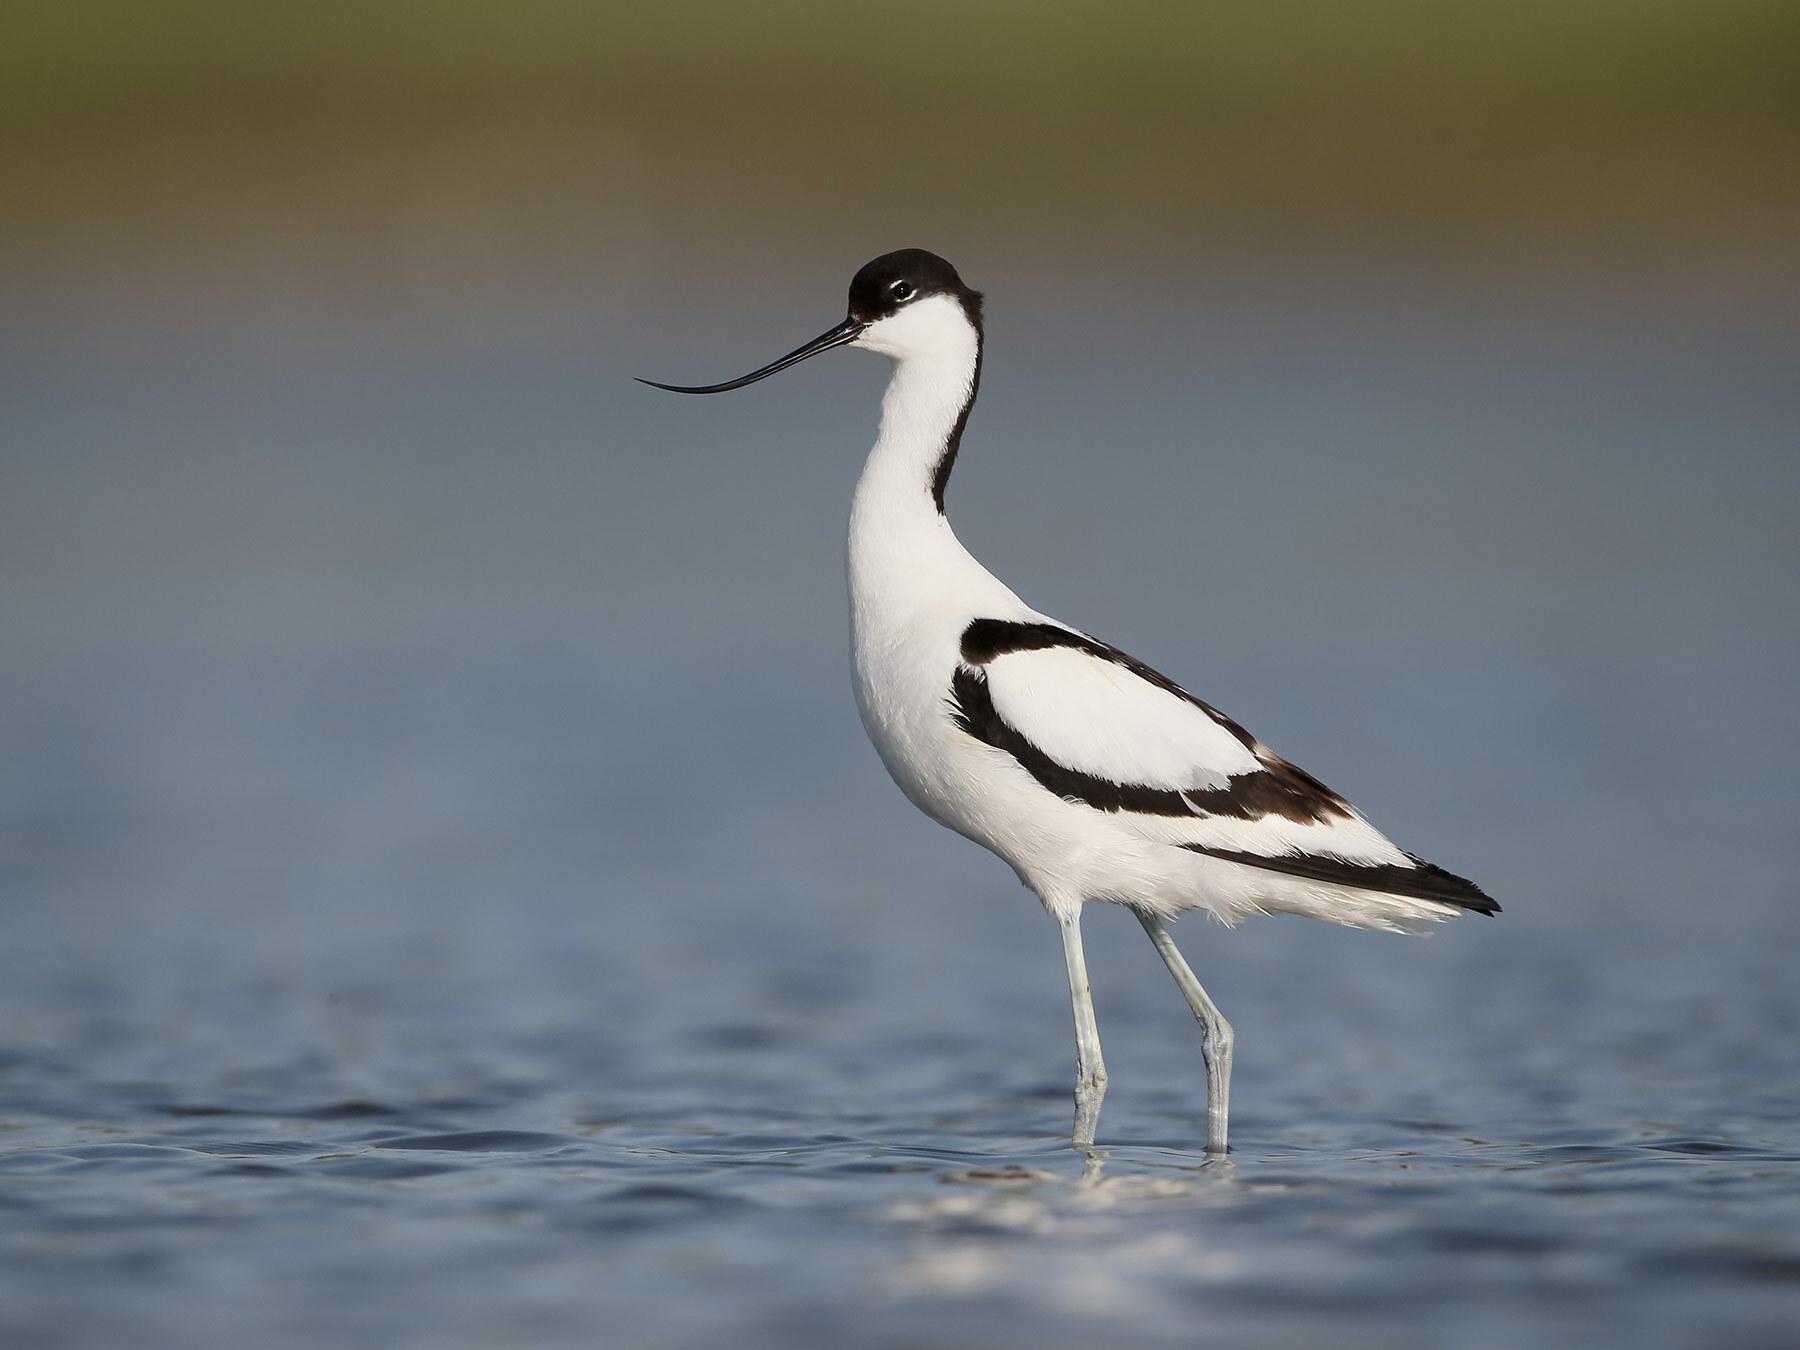 Avocets and stilts